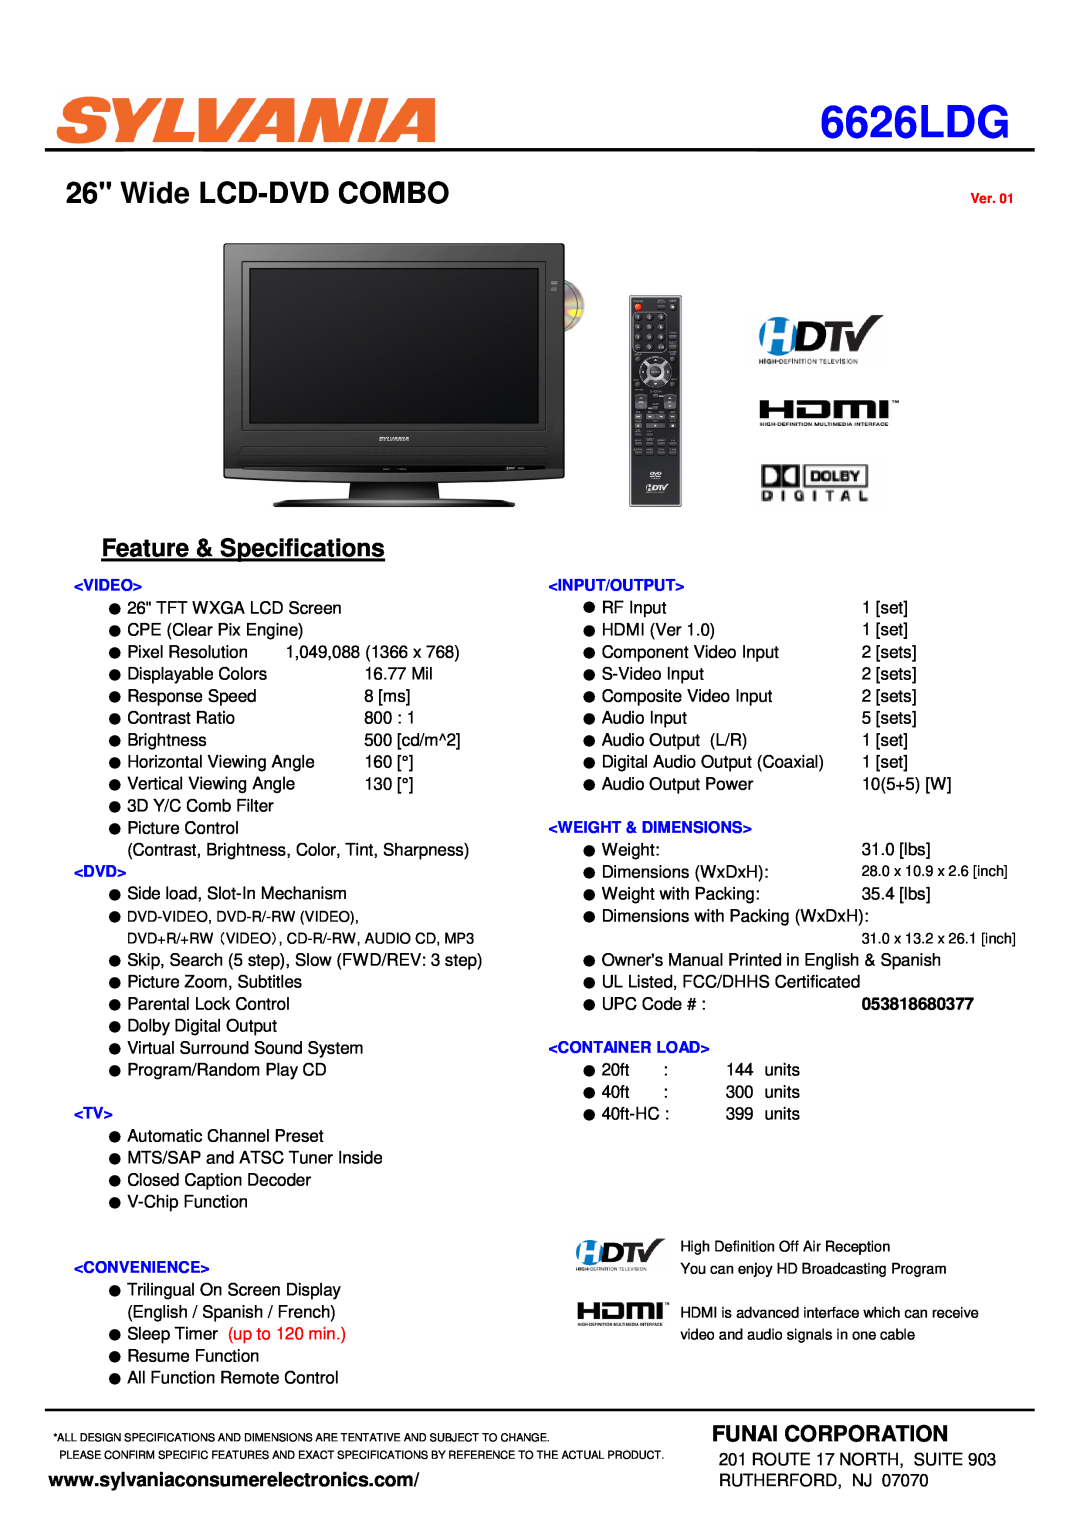 Sylvania 6626LDG specifications Wide LCD-DVD COMBO, Feature & Specifications, Funai Corporation, Video, Convenience 